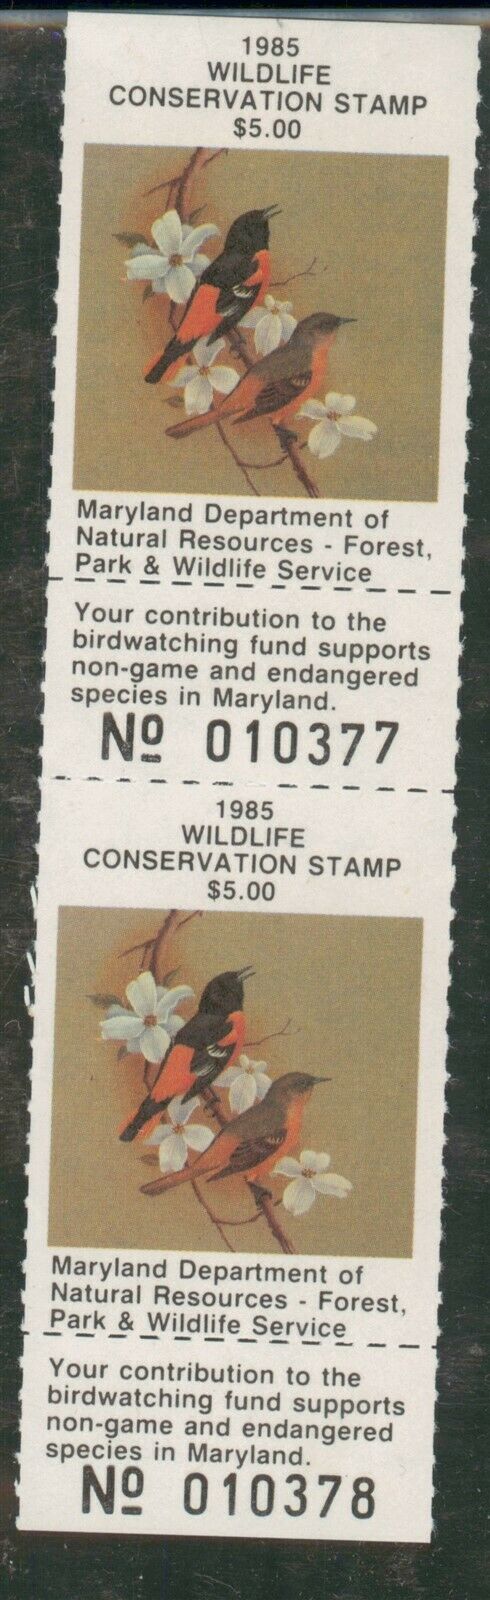 Mayfairstamps 1985 Us Conservation Stamp Mayrland Mint $5 Pair Wwp13575